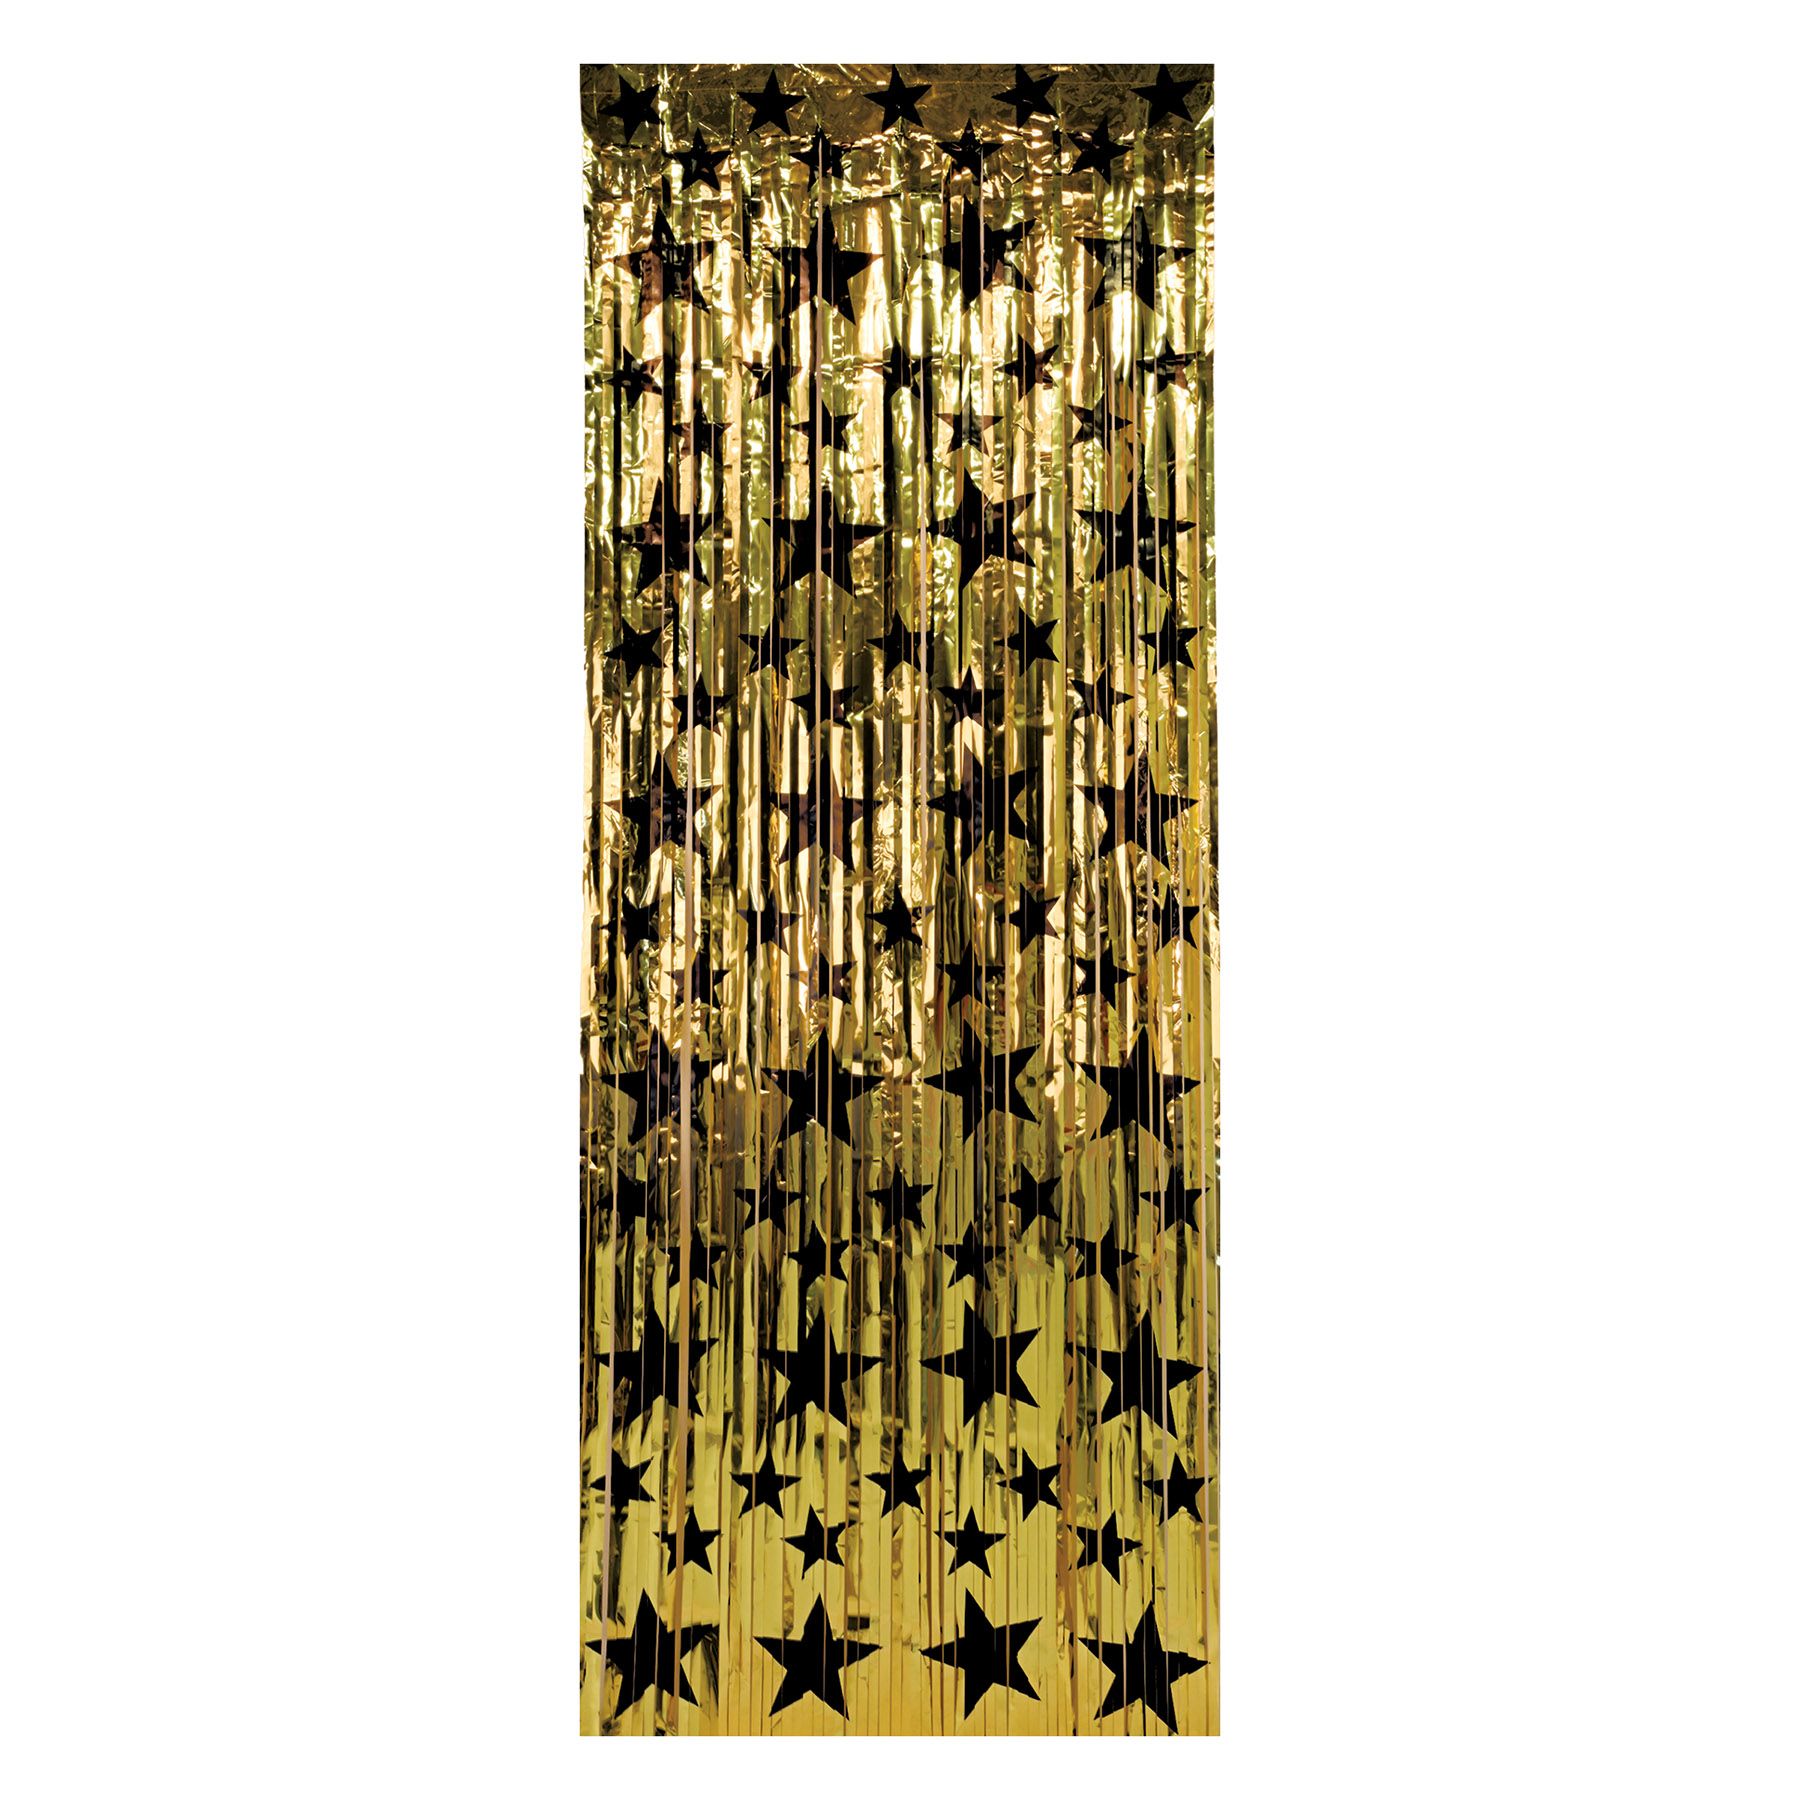 Gold Gleam 'N Curtain with Stars